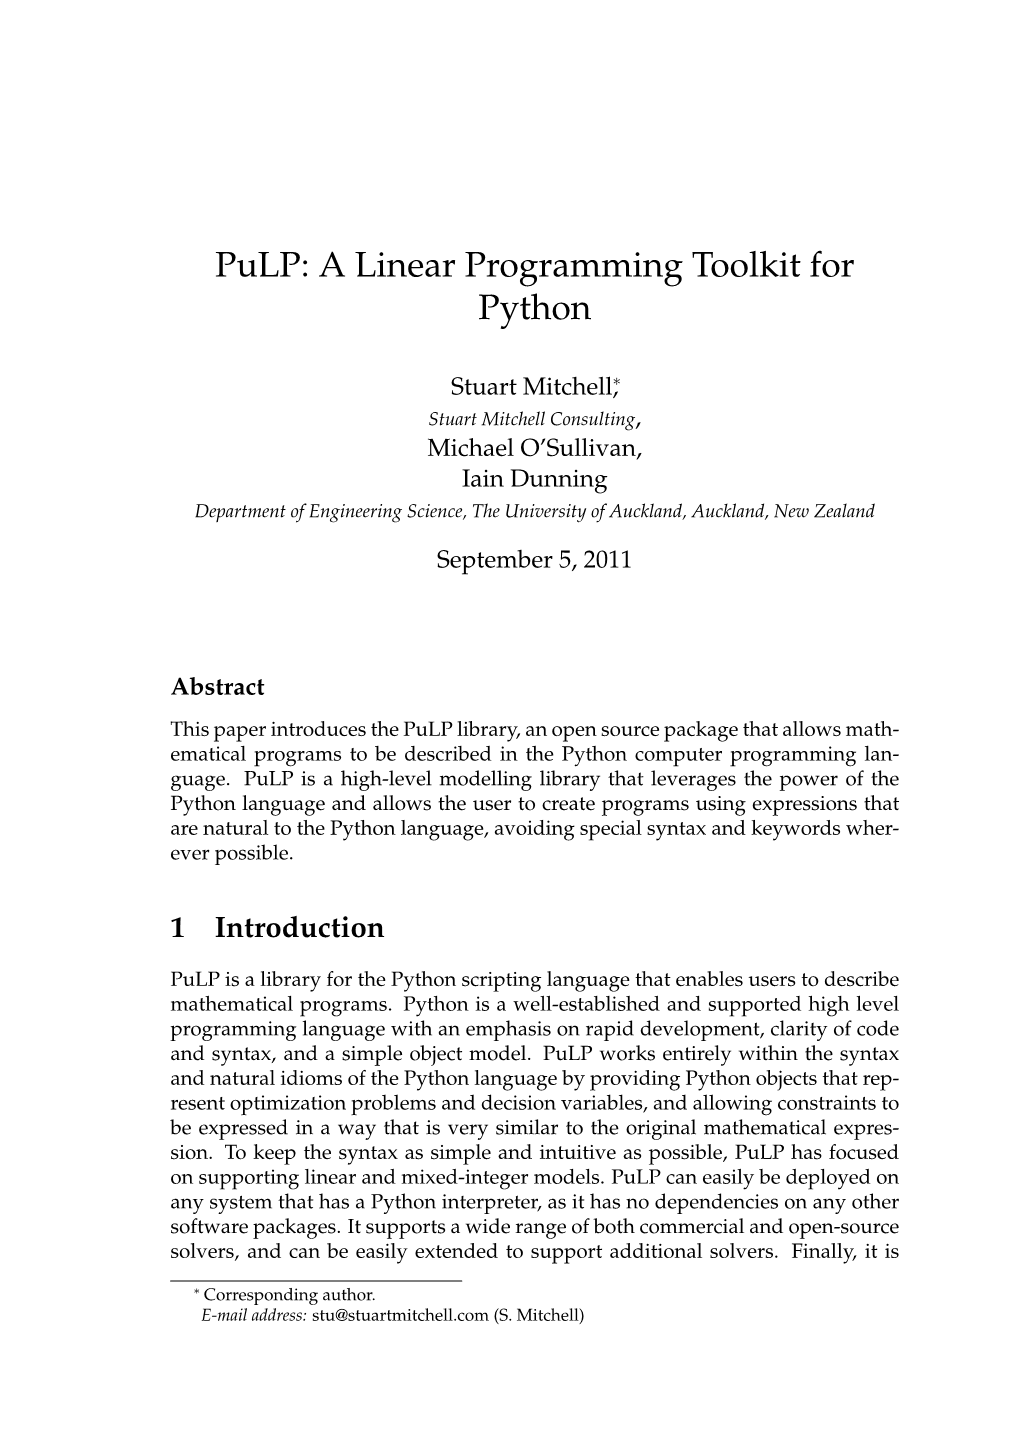 Pulp: a Linear Programming Toolkit for Python